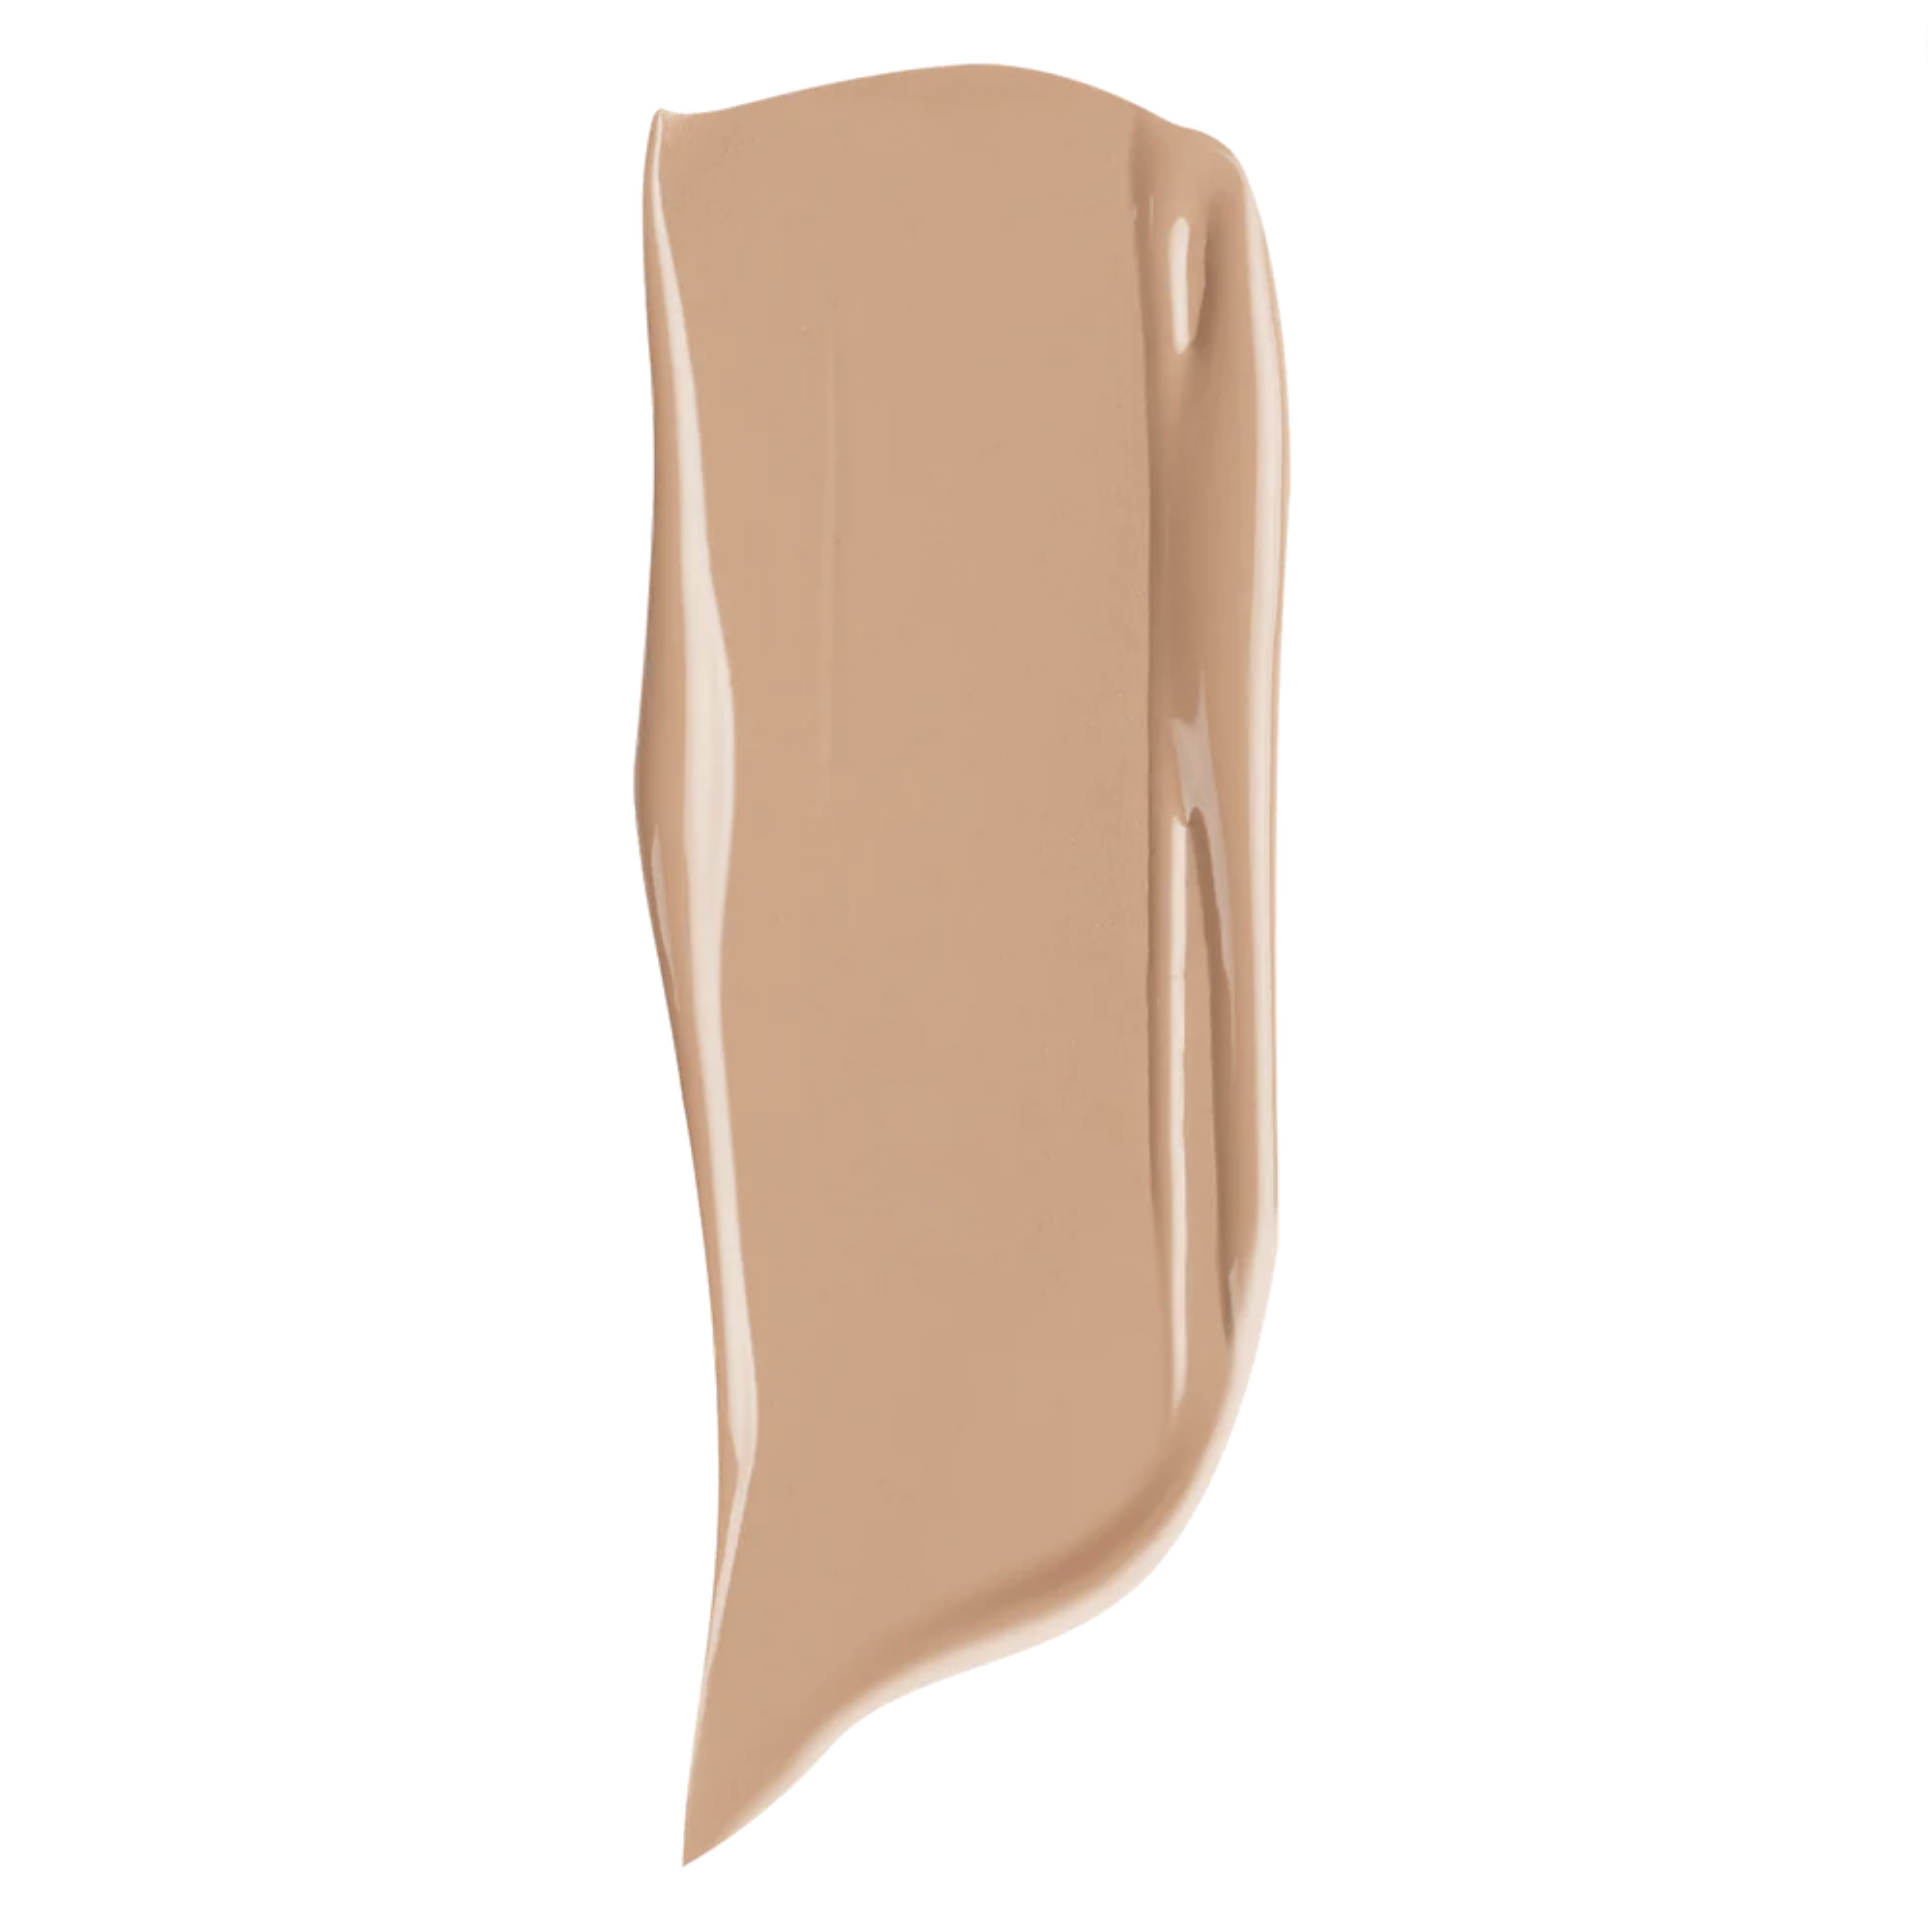 Inglot All Covered Foundation swatch - LW004